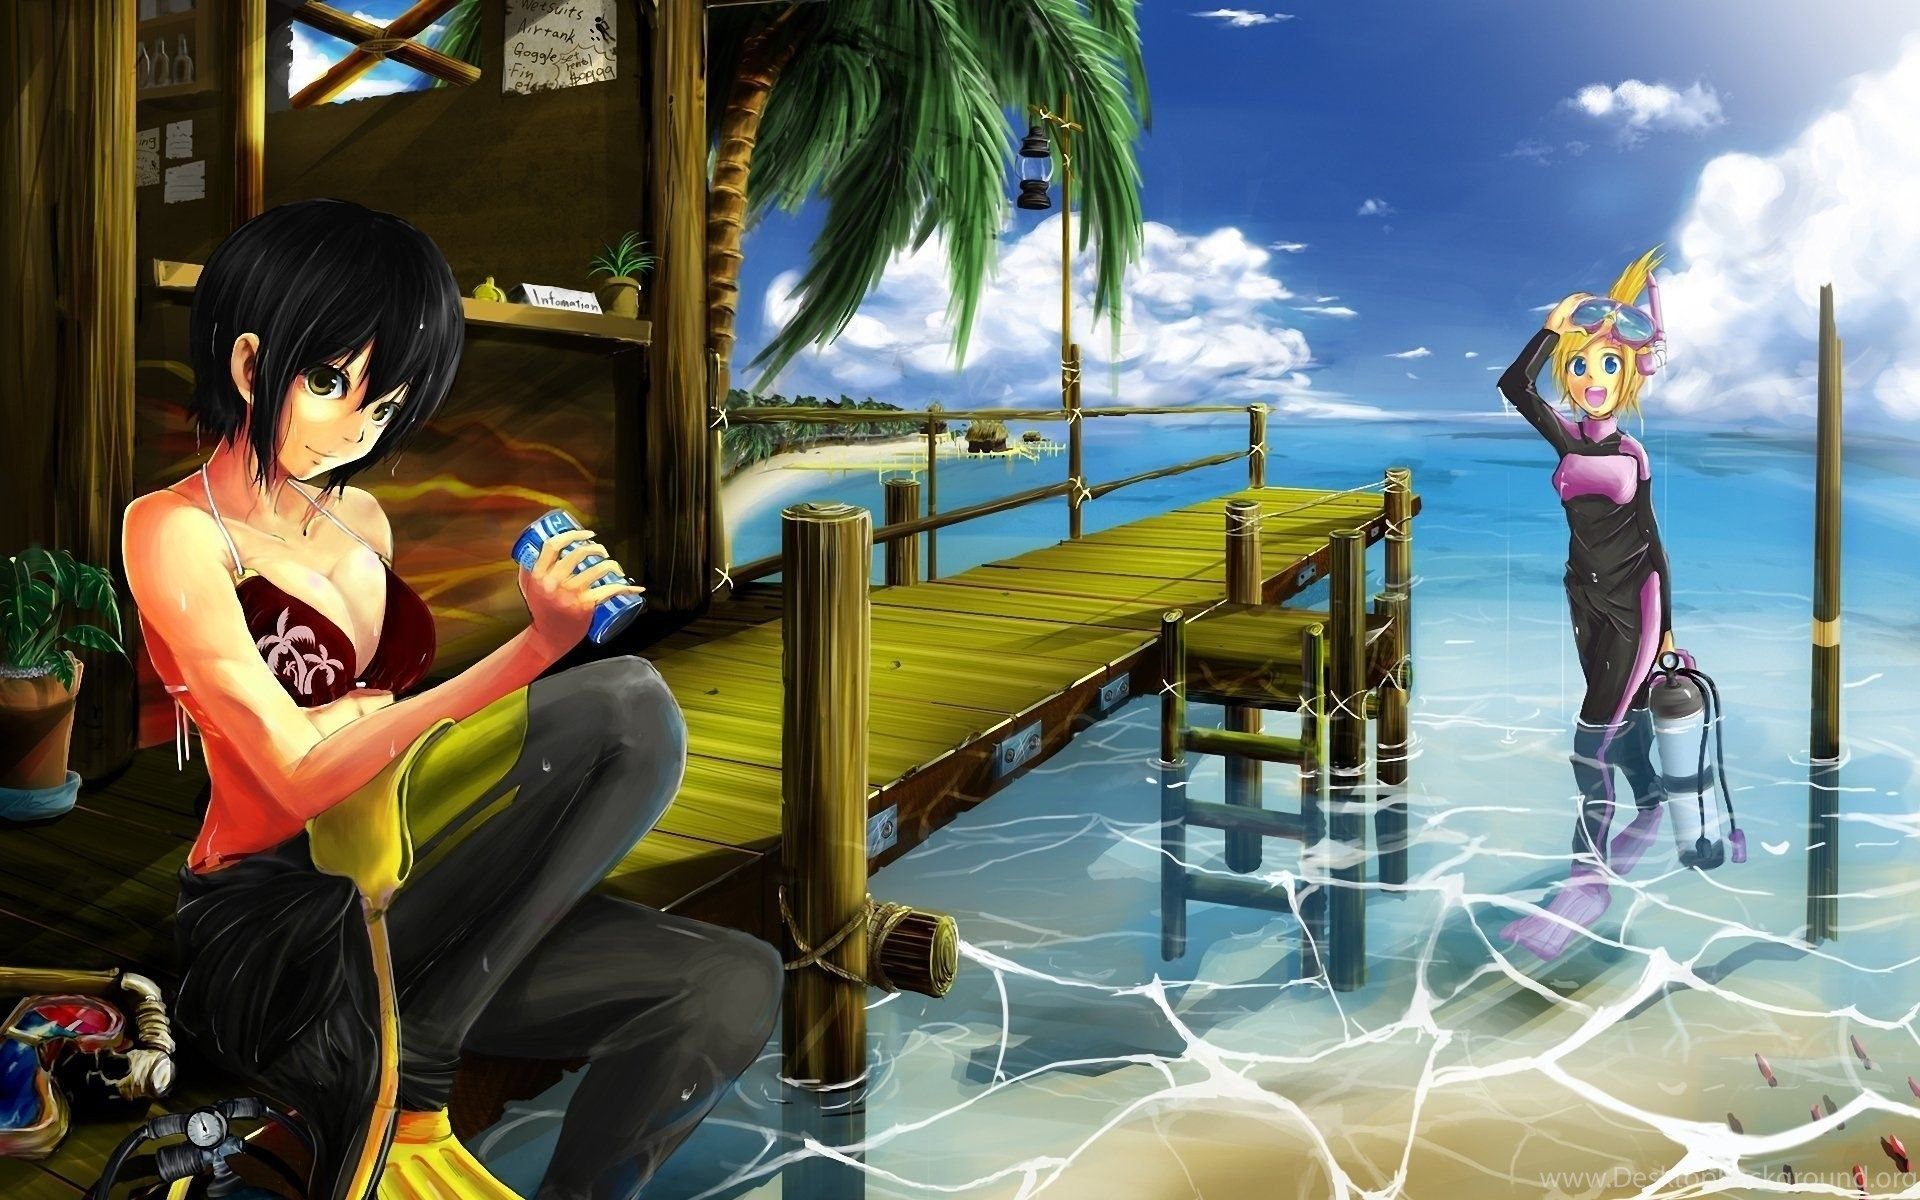 Anime Summer, Party, Beach, 1920x1200 HD Wallpaper And FREE Stock. Desktop Background